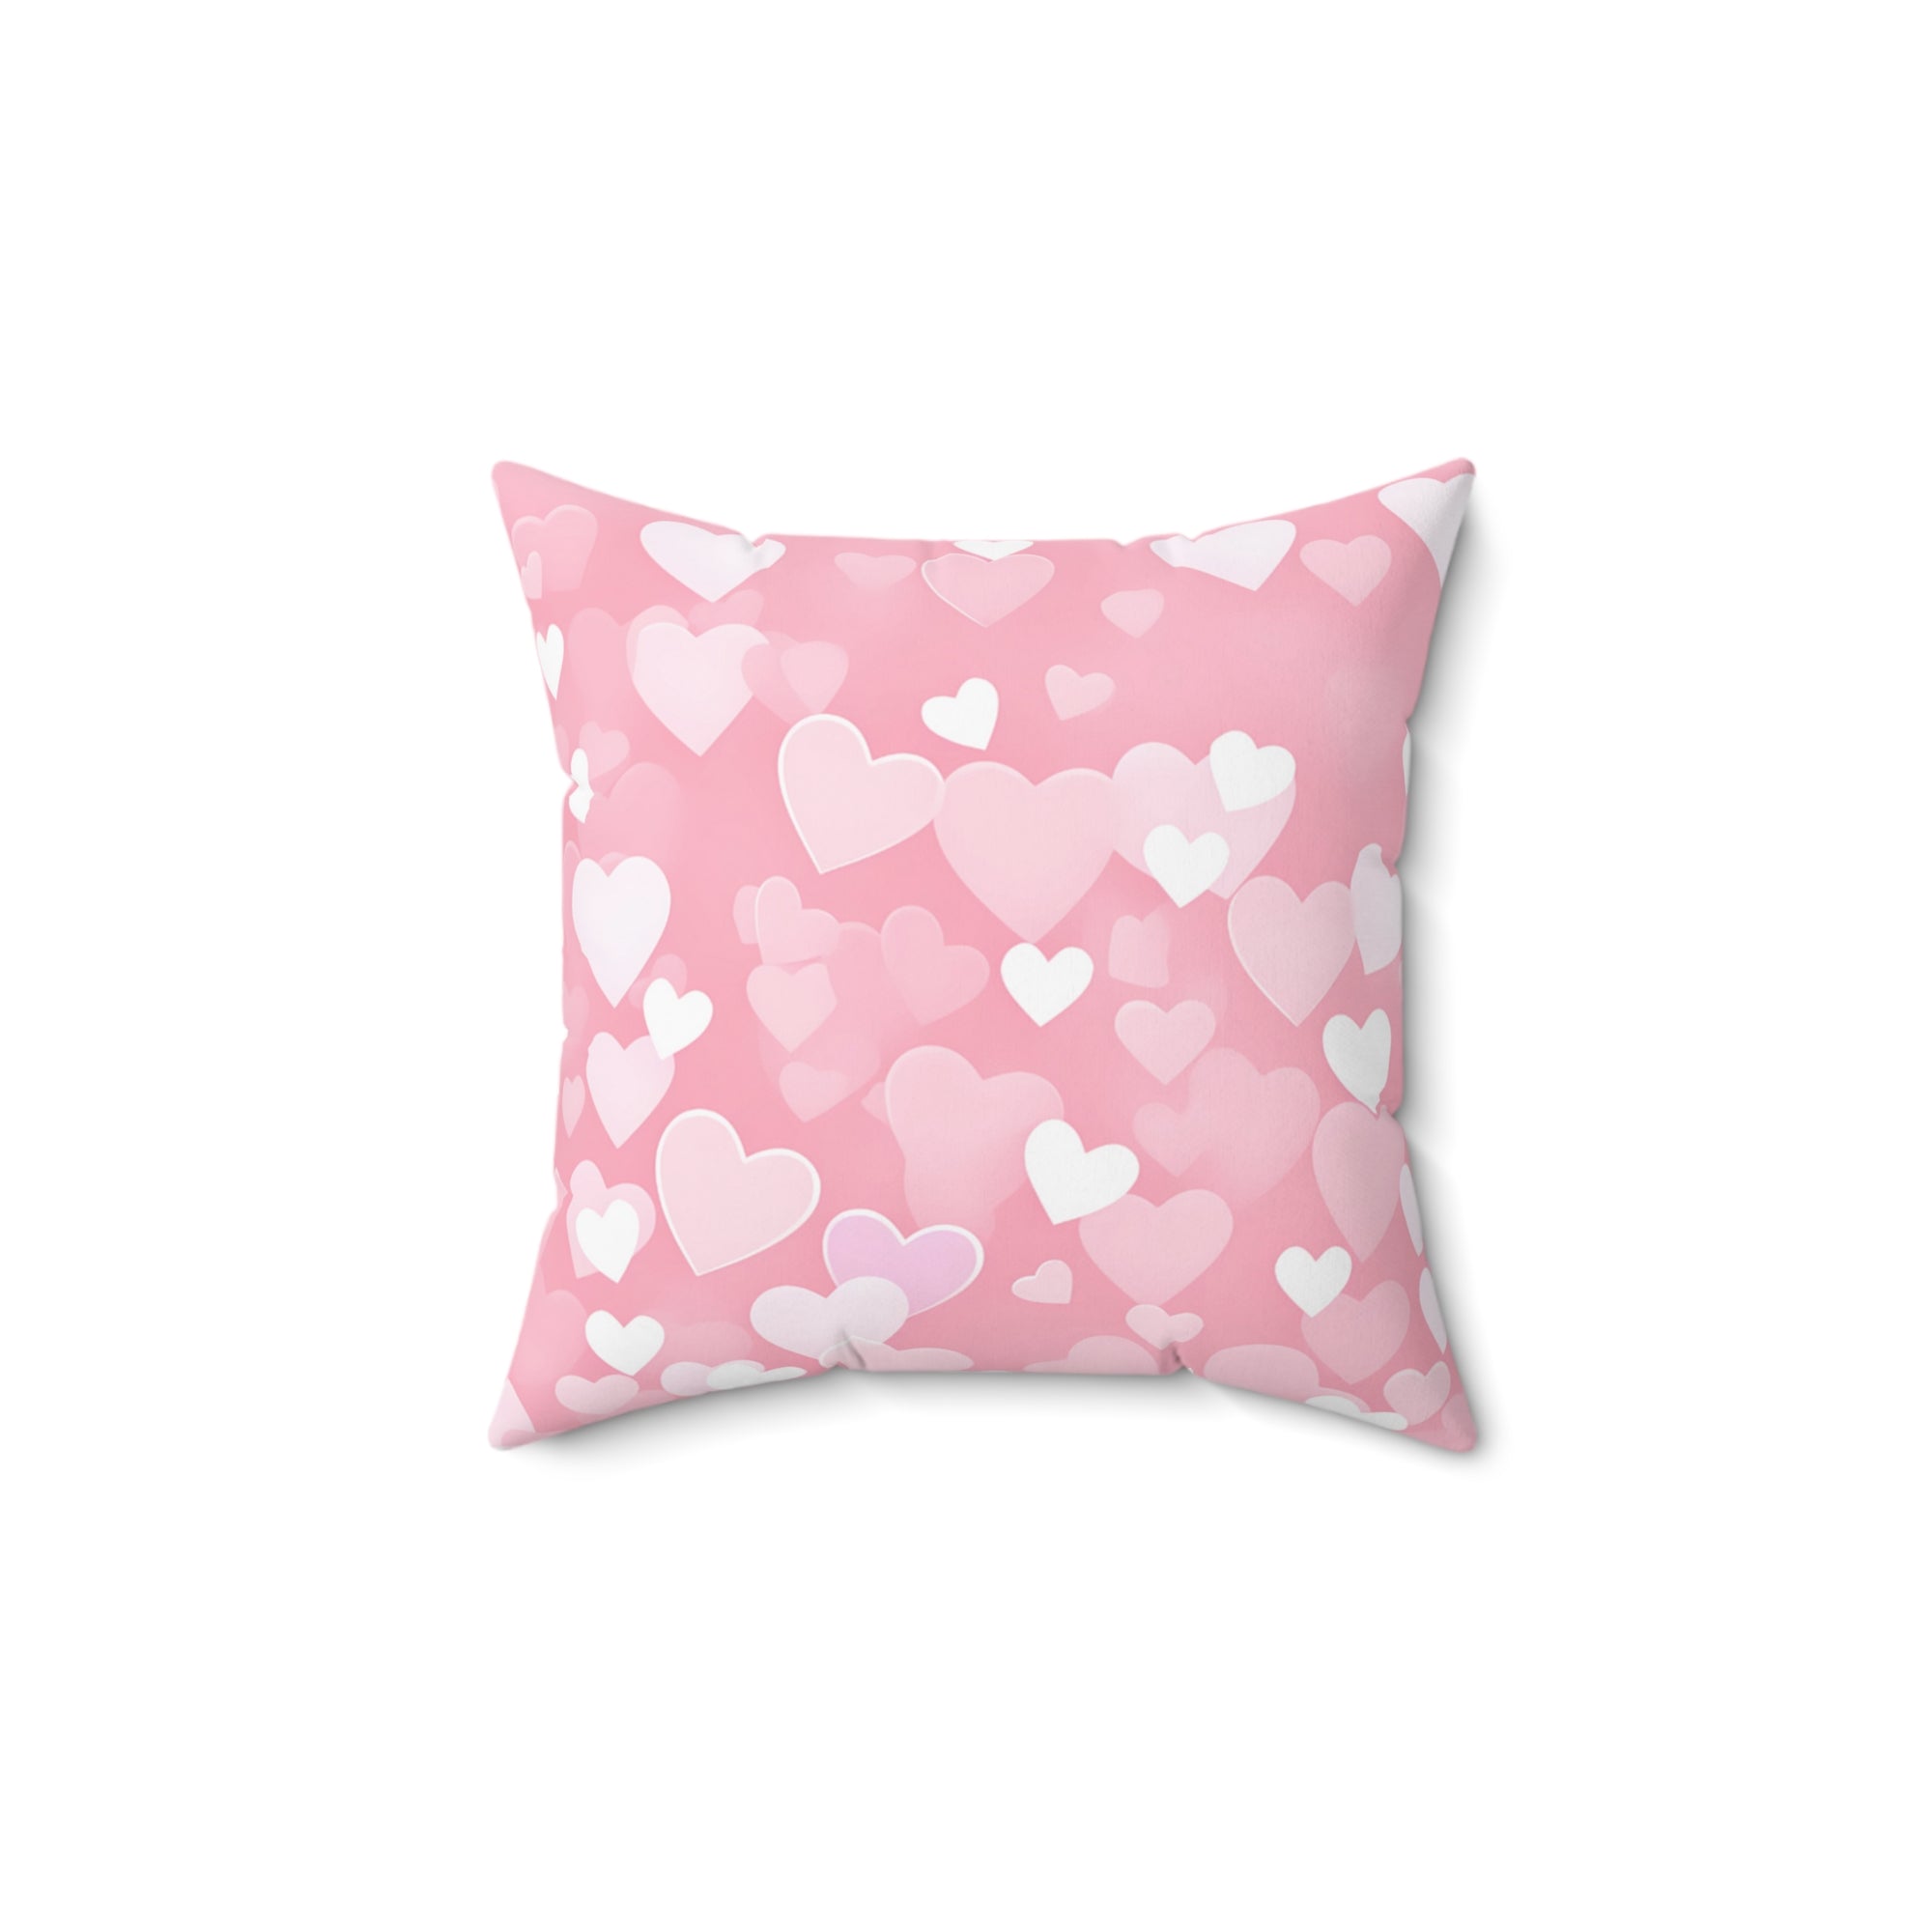 Spun Polyester Square Pillow with light pink hearts